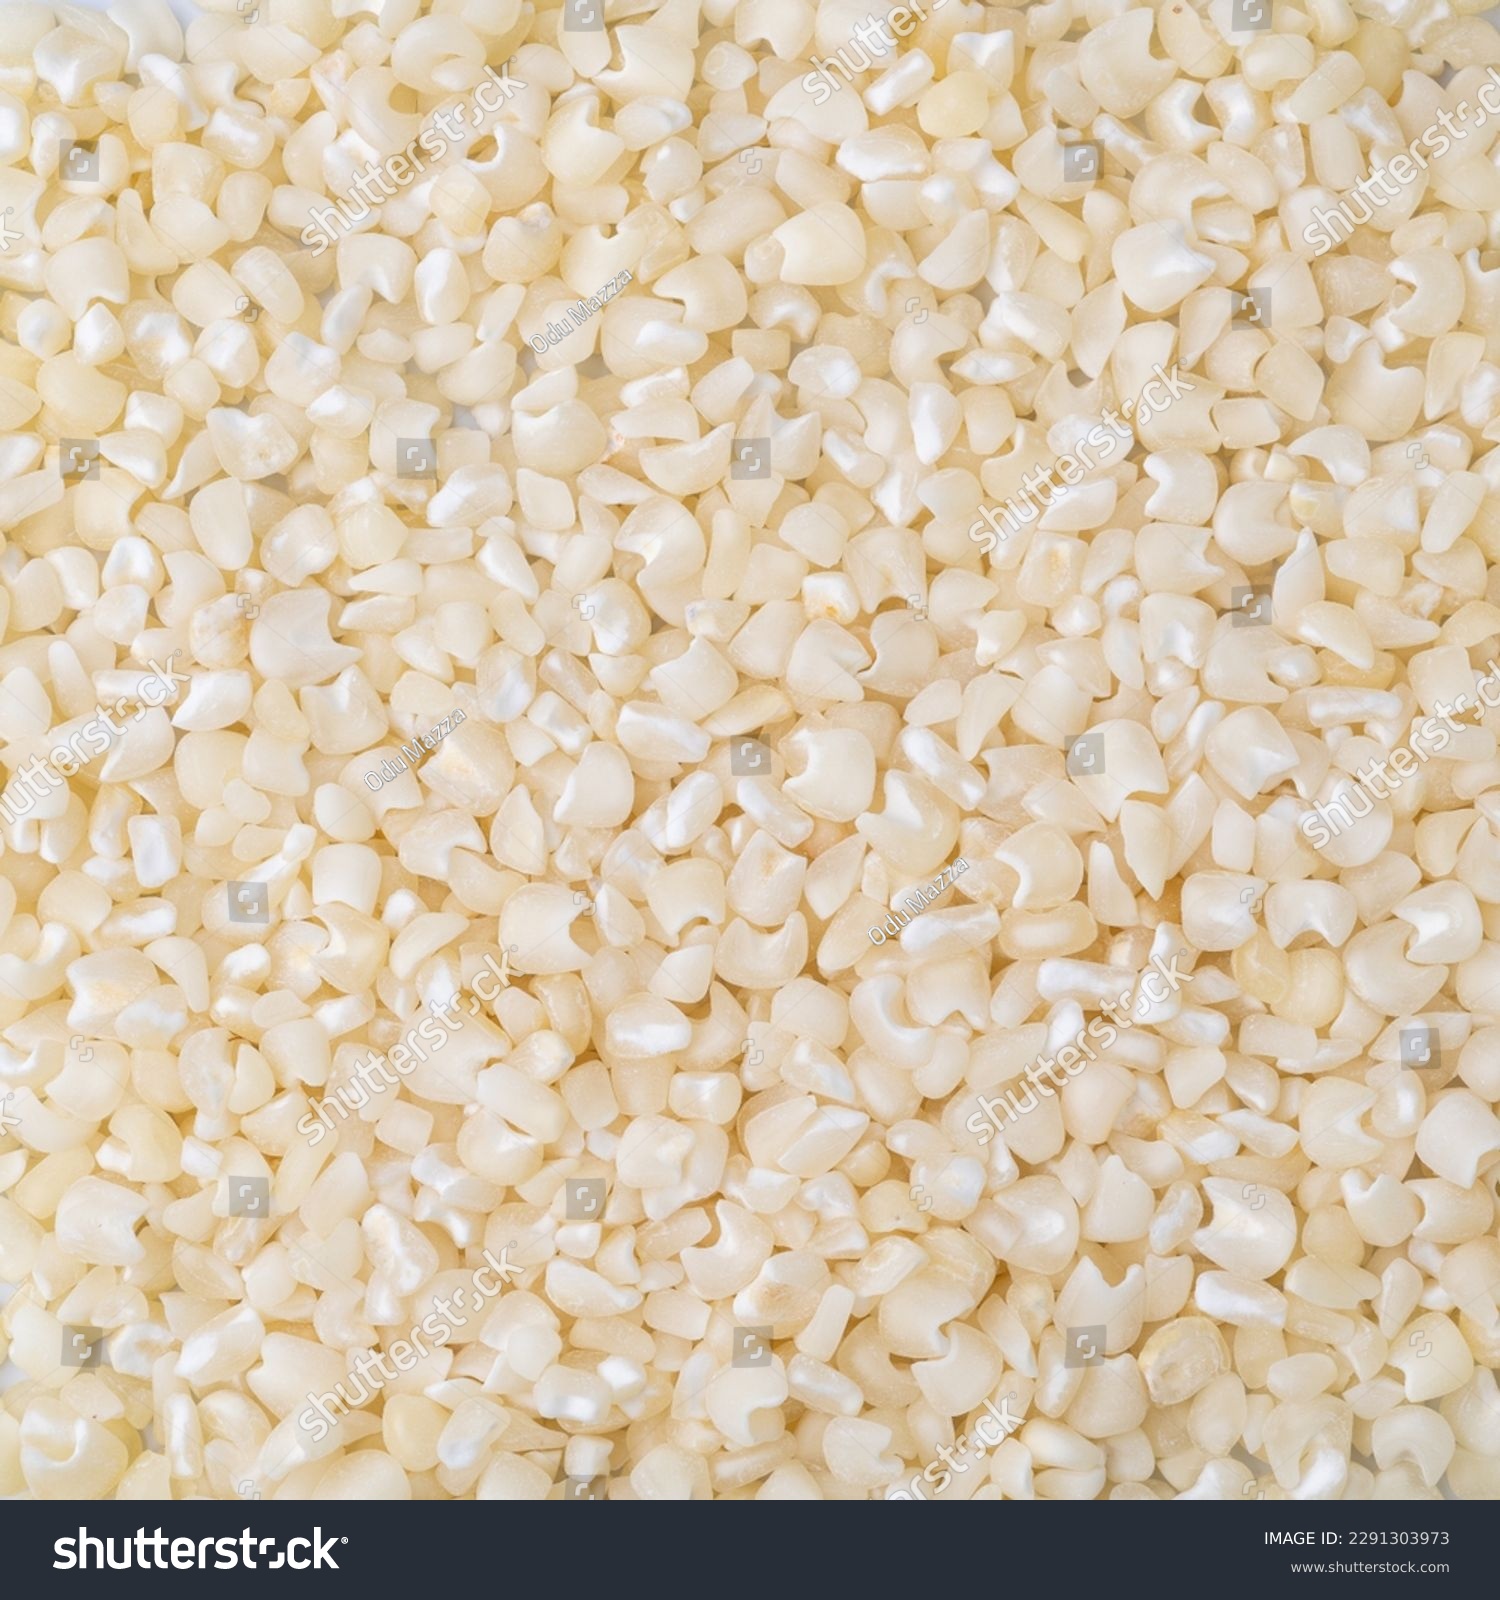 Closeup, top view of dried white corn or canjica. Food backdrop. #2291303973